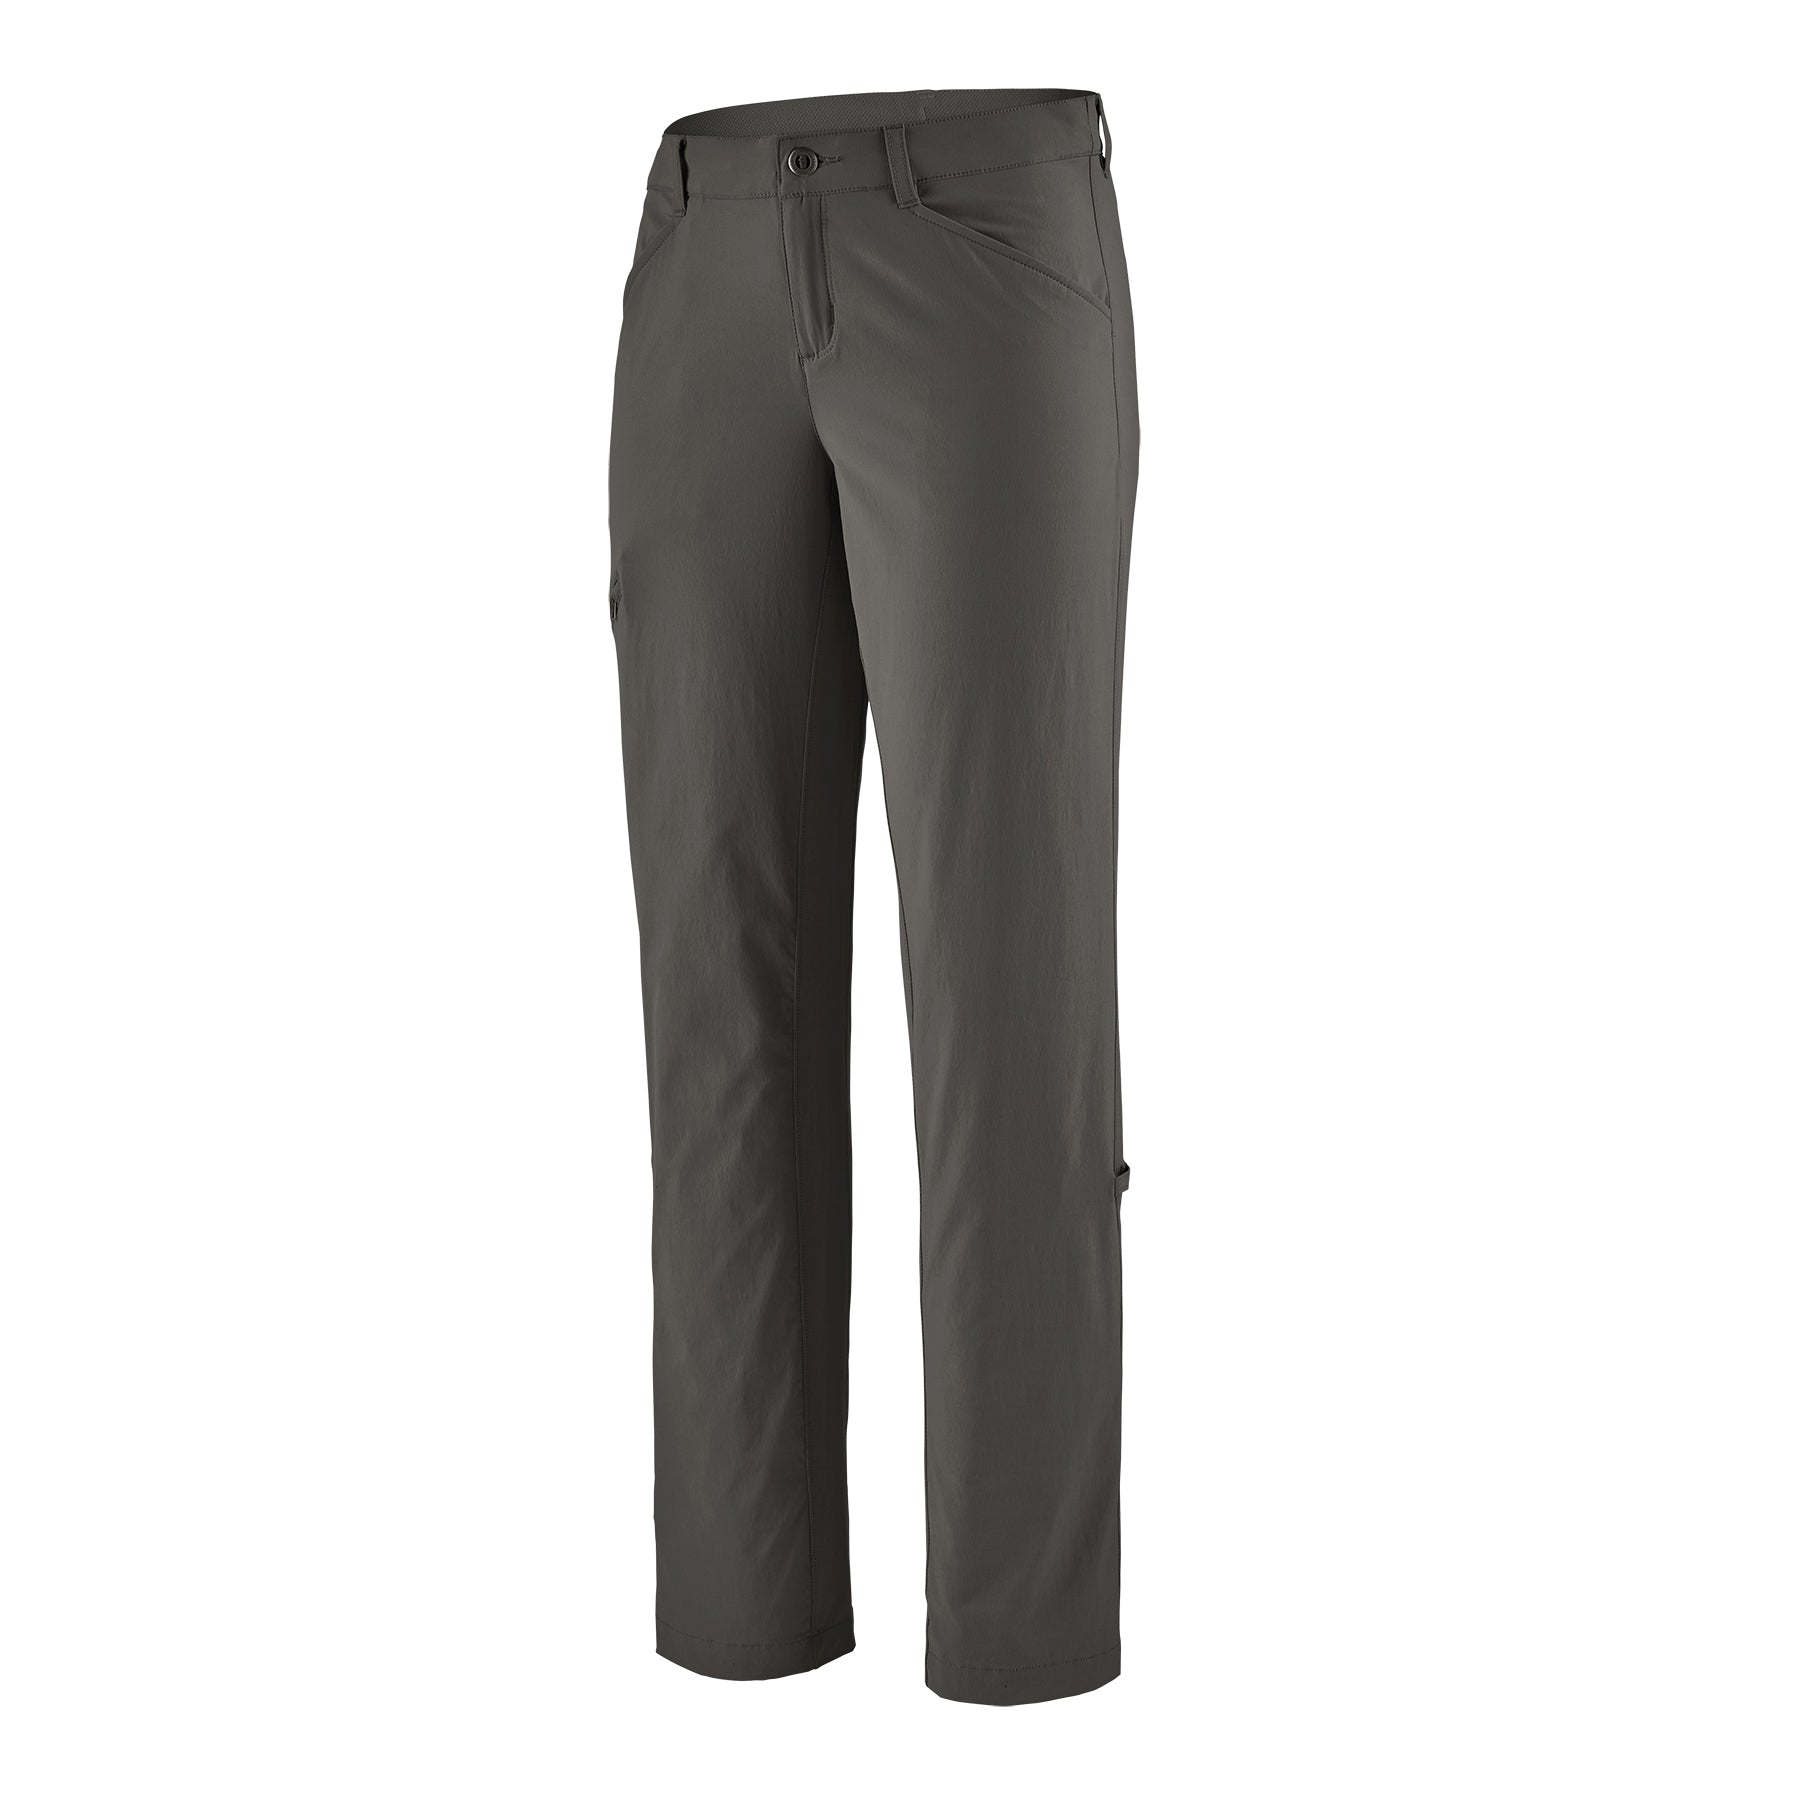 Patagonia CHAMBEAU ROCK PANTS - Outdoor trousers - light plume grey/grey 